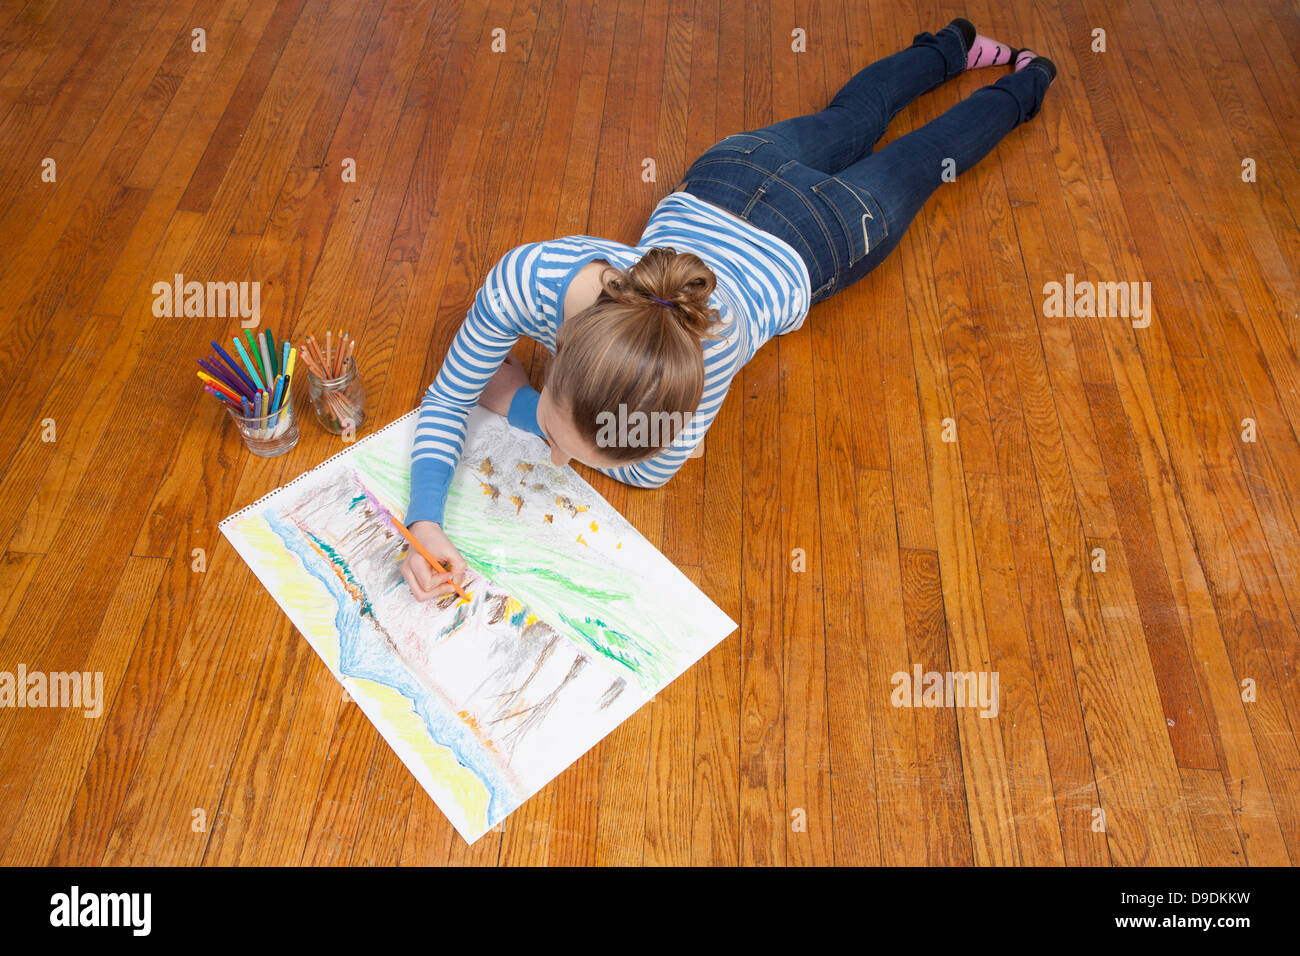 Girl lying on floor dimensions photo Banque D'Images